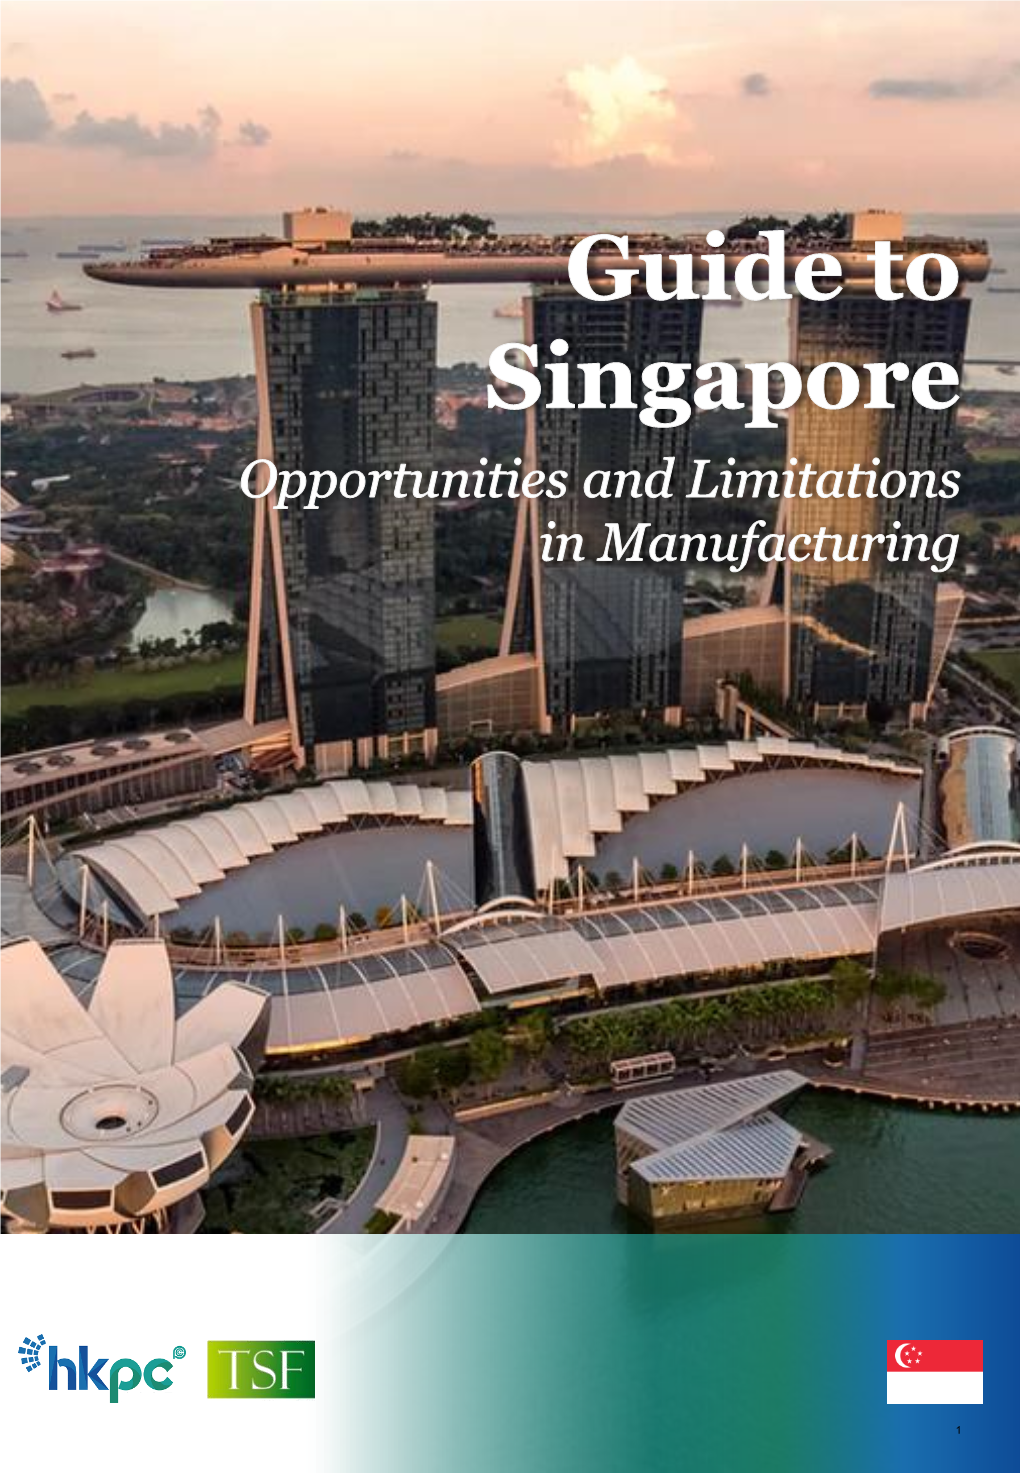 1. Overview of Singapore P